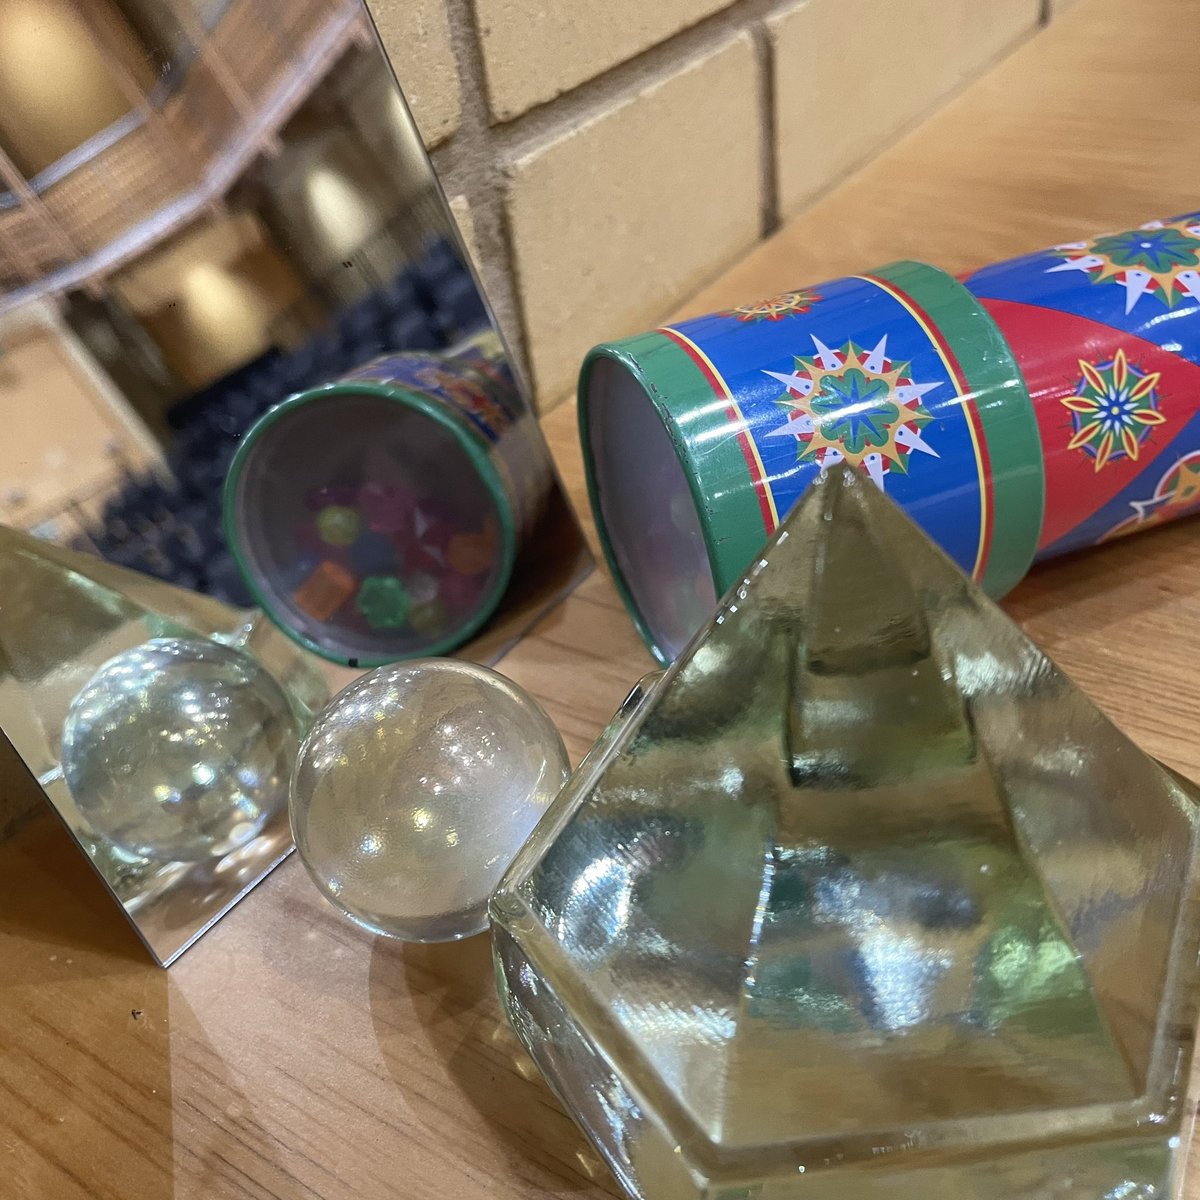 On April 7th @BCMG is performing Abalorios: A Young Person’s Guide to the Contemporary Music Ensemble by @HildaMParedes. Today at #MusicMaze we are making A Grown-ups Guide to the Instruments of Music Maze. Abalorios - a glass bead game. Reflections, refractions and rotations.